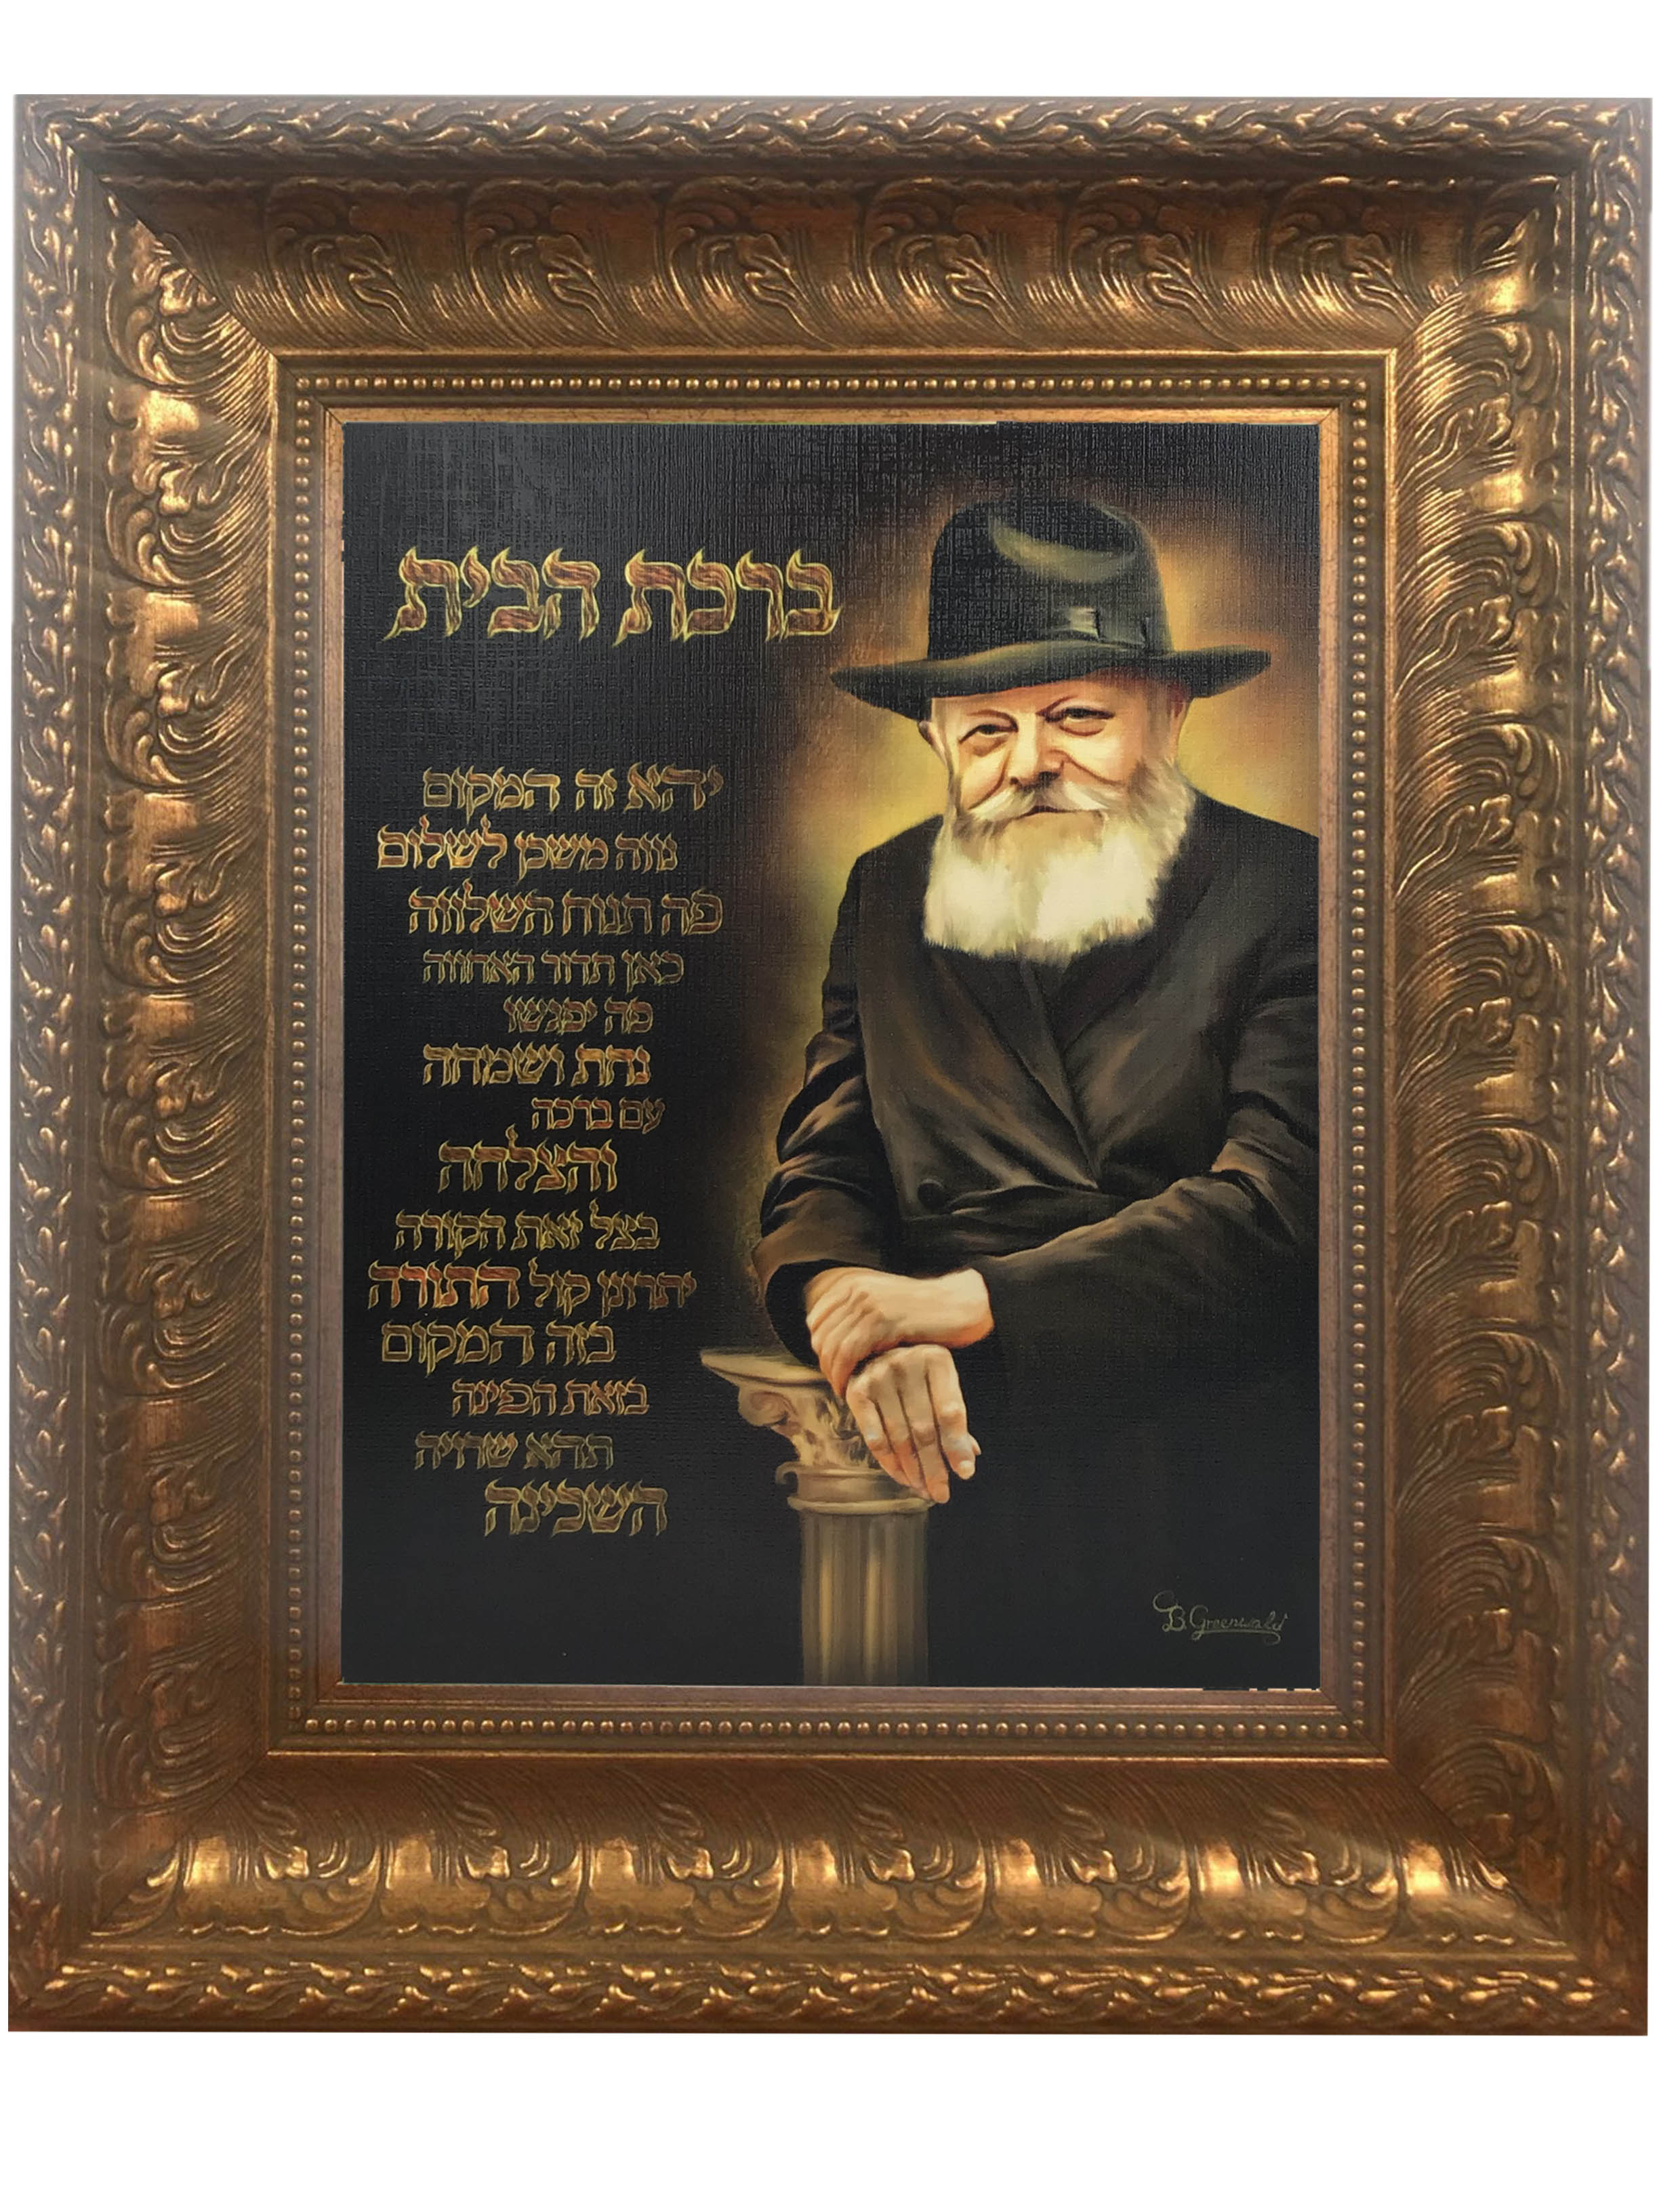 Lubavitcher Rebbe with Birchat Habayit